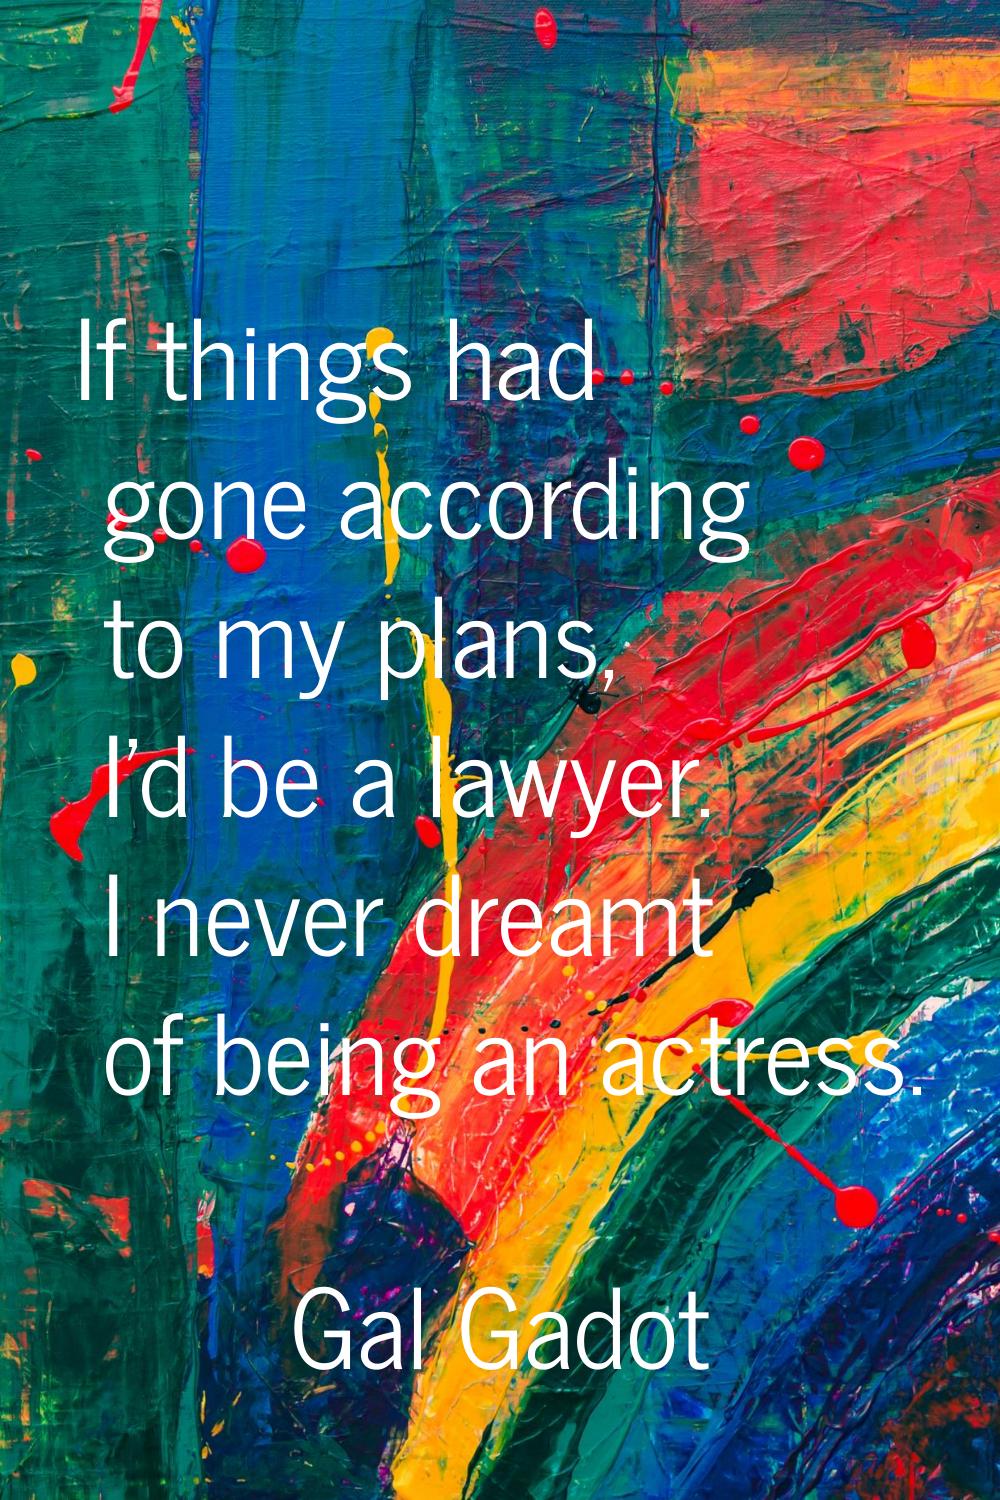 If things had gone according to my plans, I'd be a lawyer. I never dreamt of being an actress.